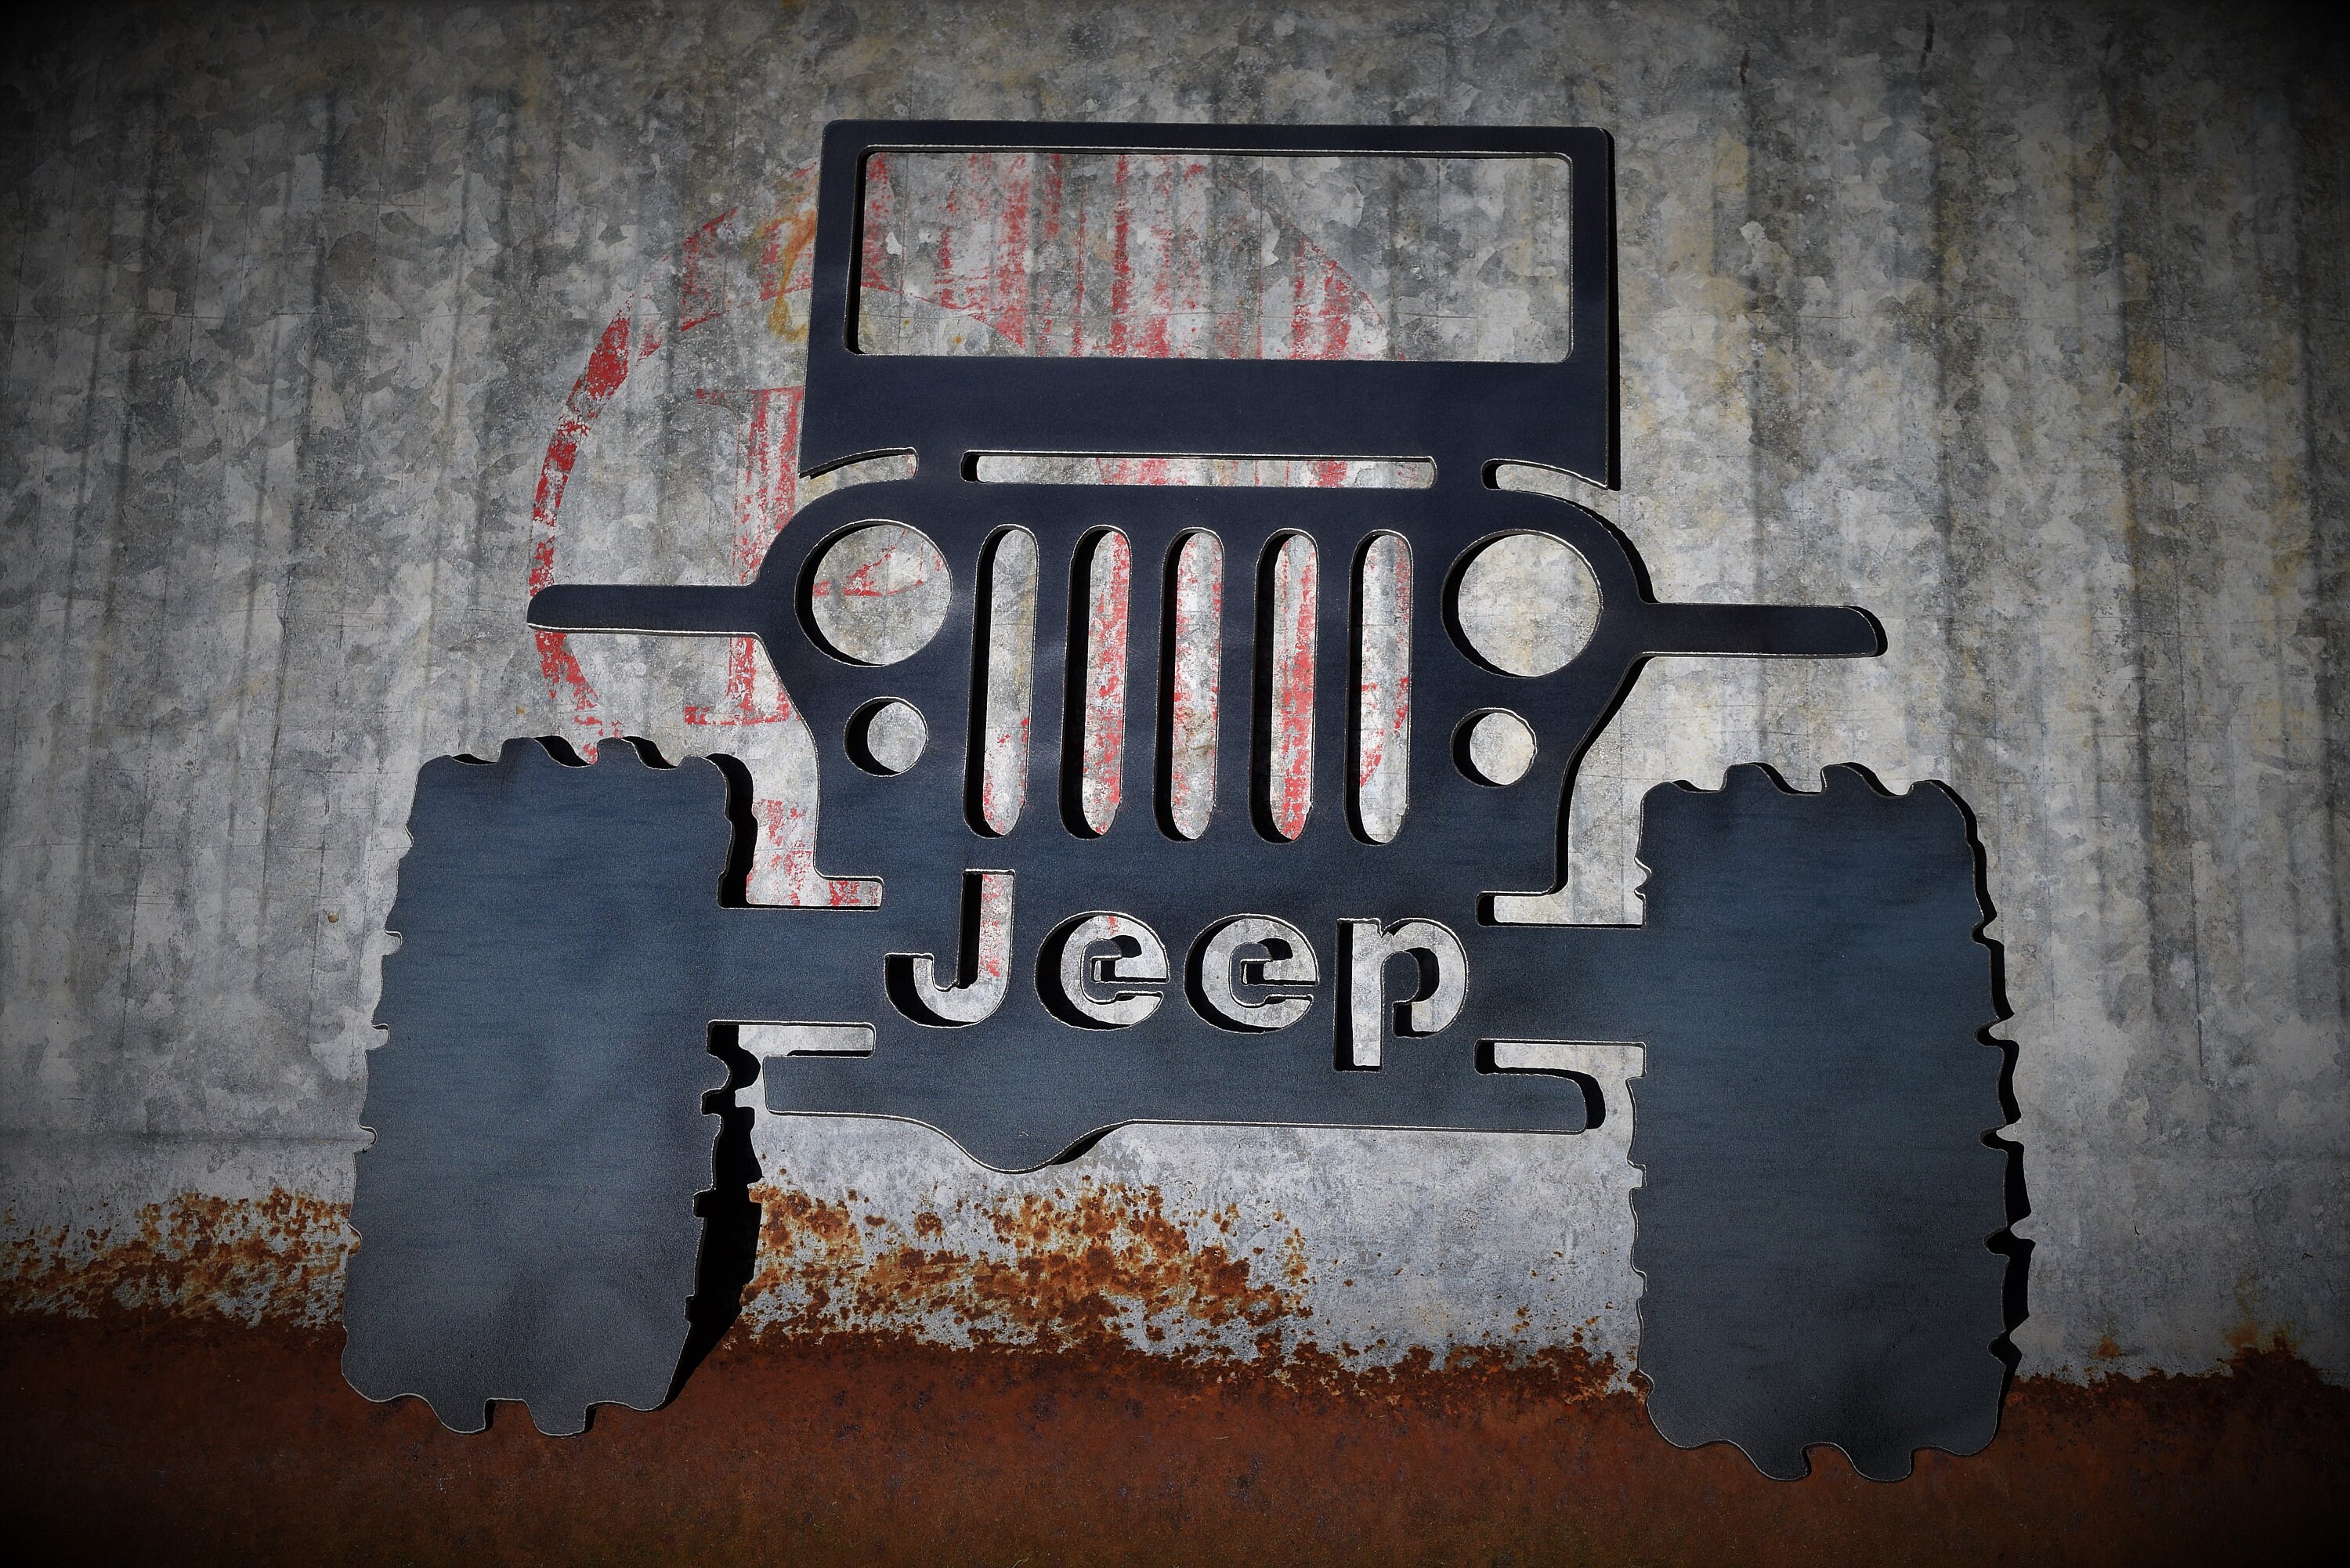 Jeep Metal Rustic Sign Off Roading Explore Trails Adventure | Etsy